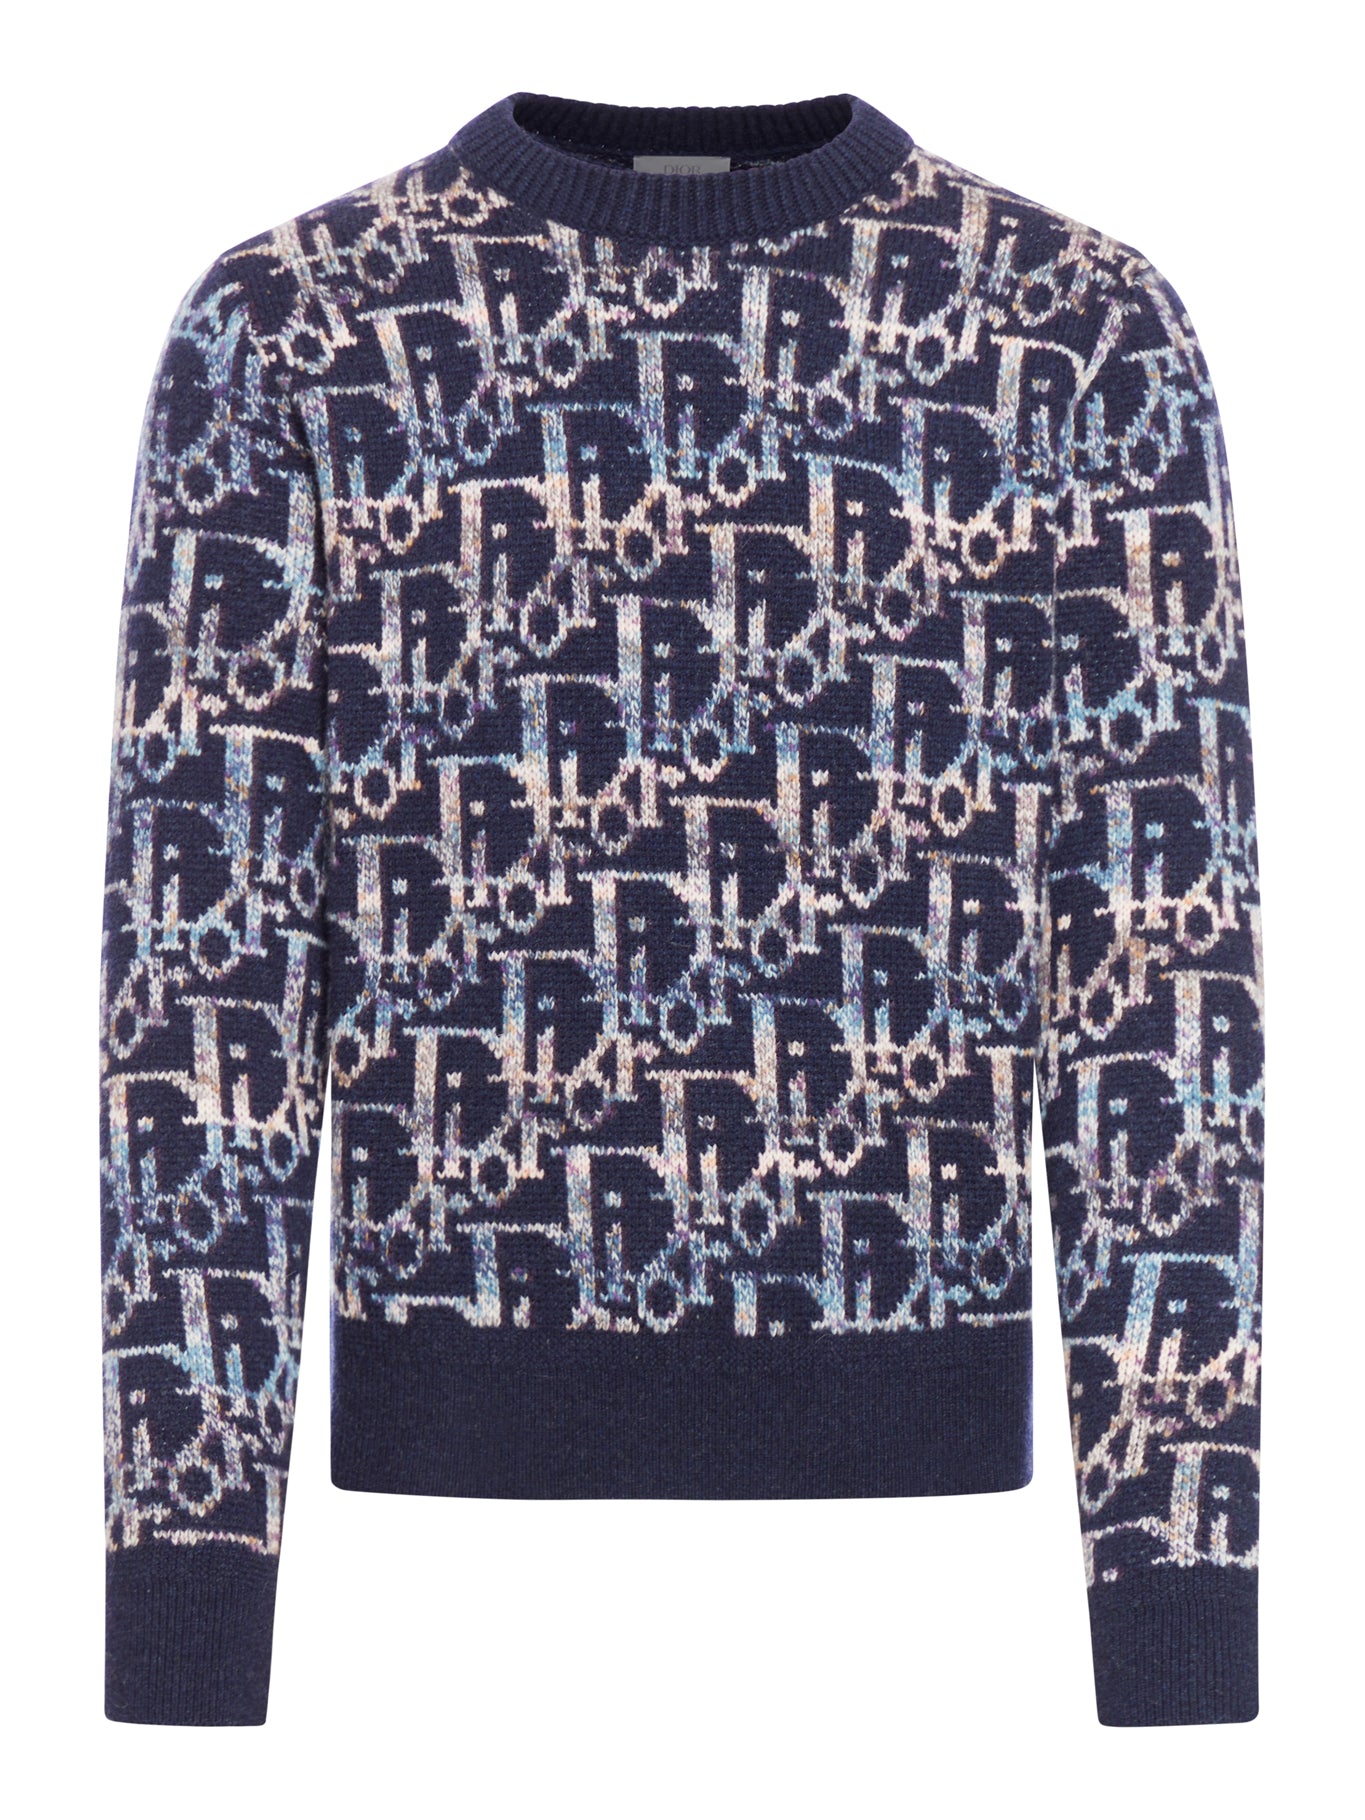 DIOR OBLIQUE SWEATER in wool Jacquard